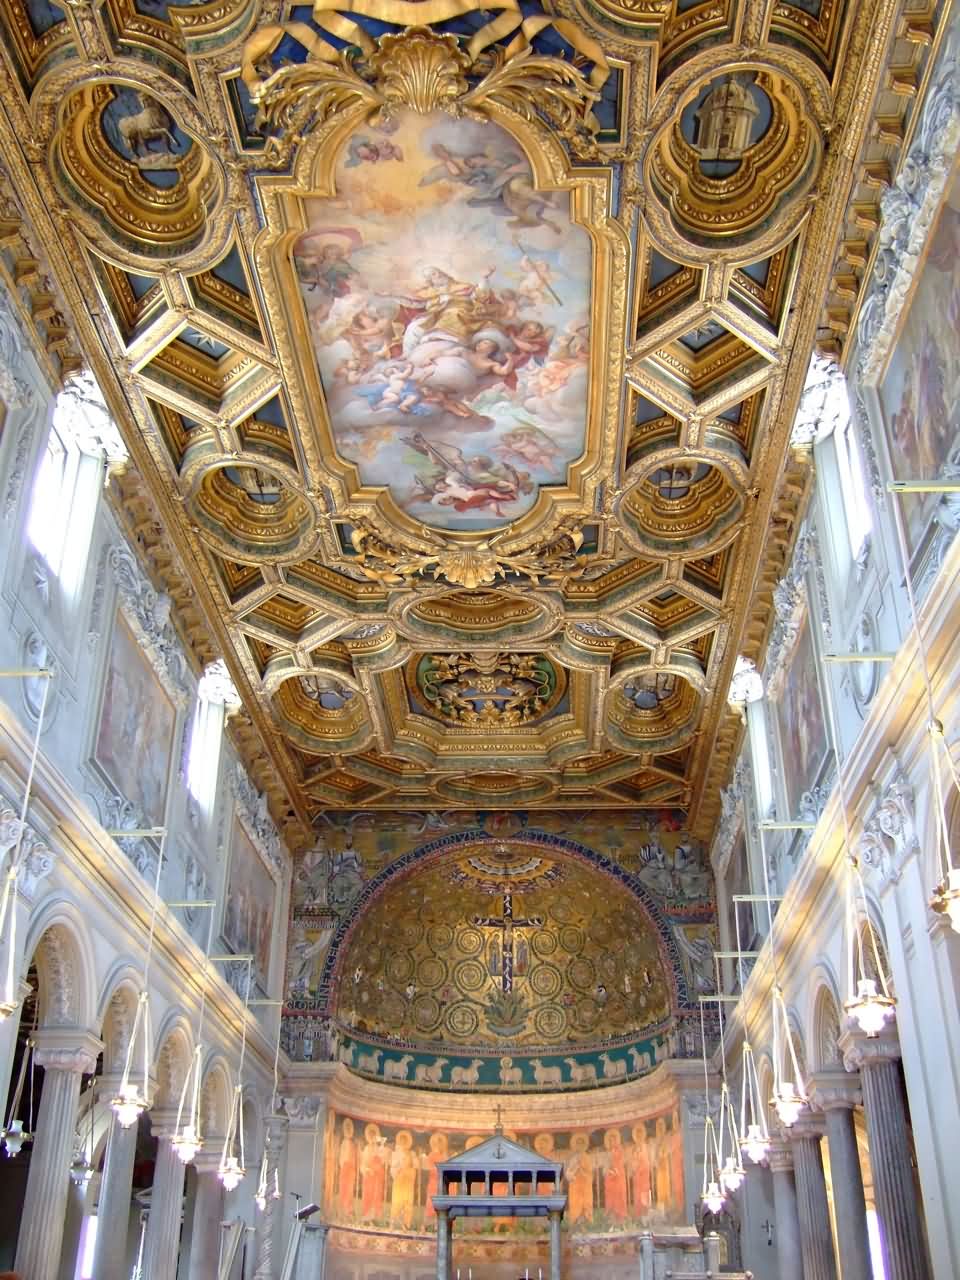 Ceiling Inside The Basilica of San Clemente